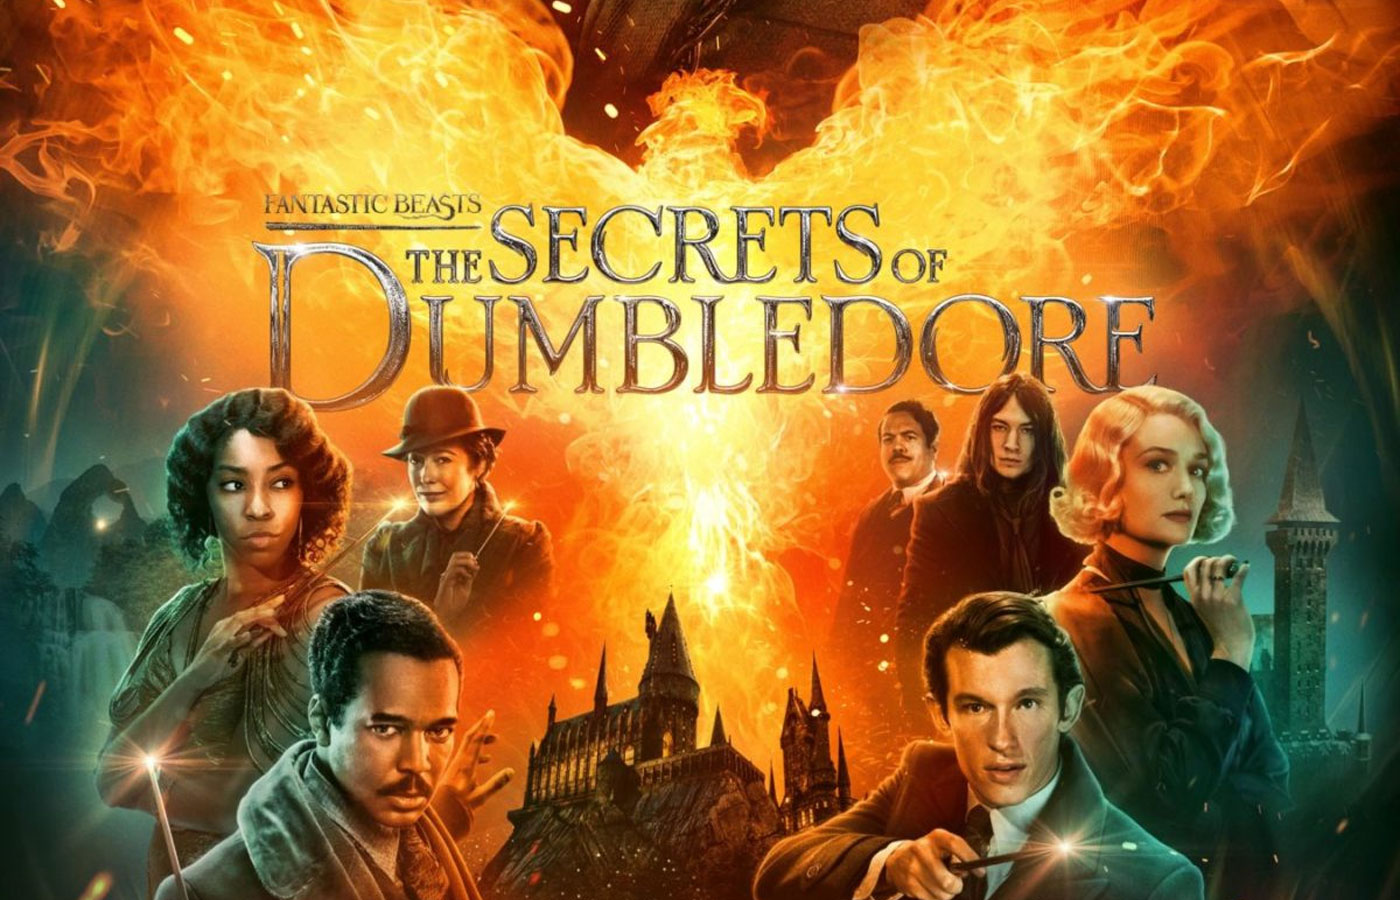 upcoming-Movie-Fantastic-Beasts-The-Secrets-of-Dumbledores